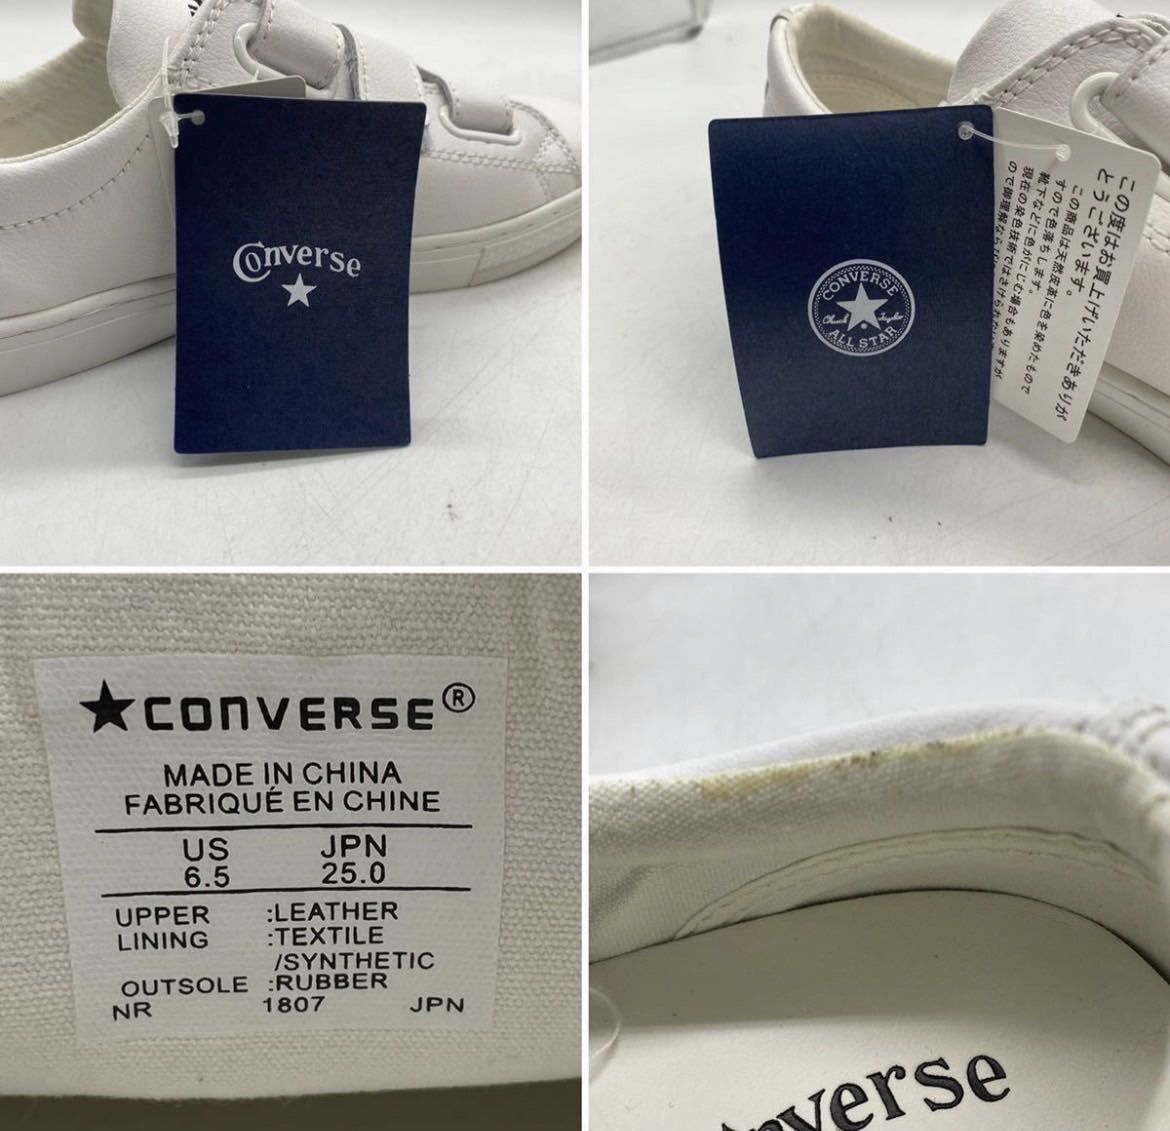 [25cm] new goods CONVERSE ALL STAR COUPE V-3 OX leather White Converse all Star kp white box none velcro made in China 2249